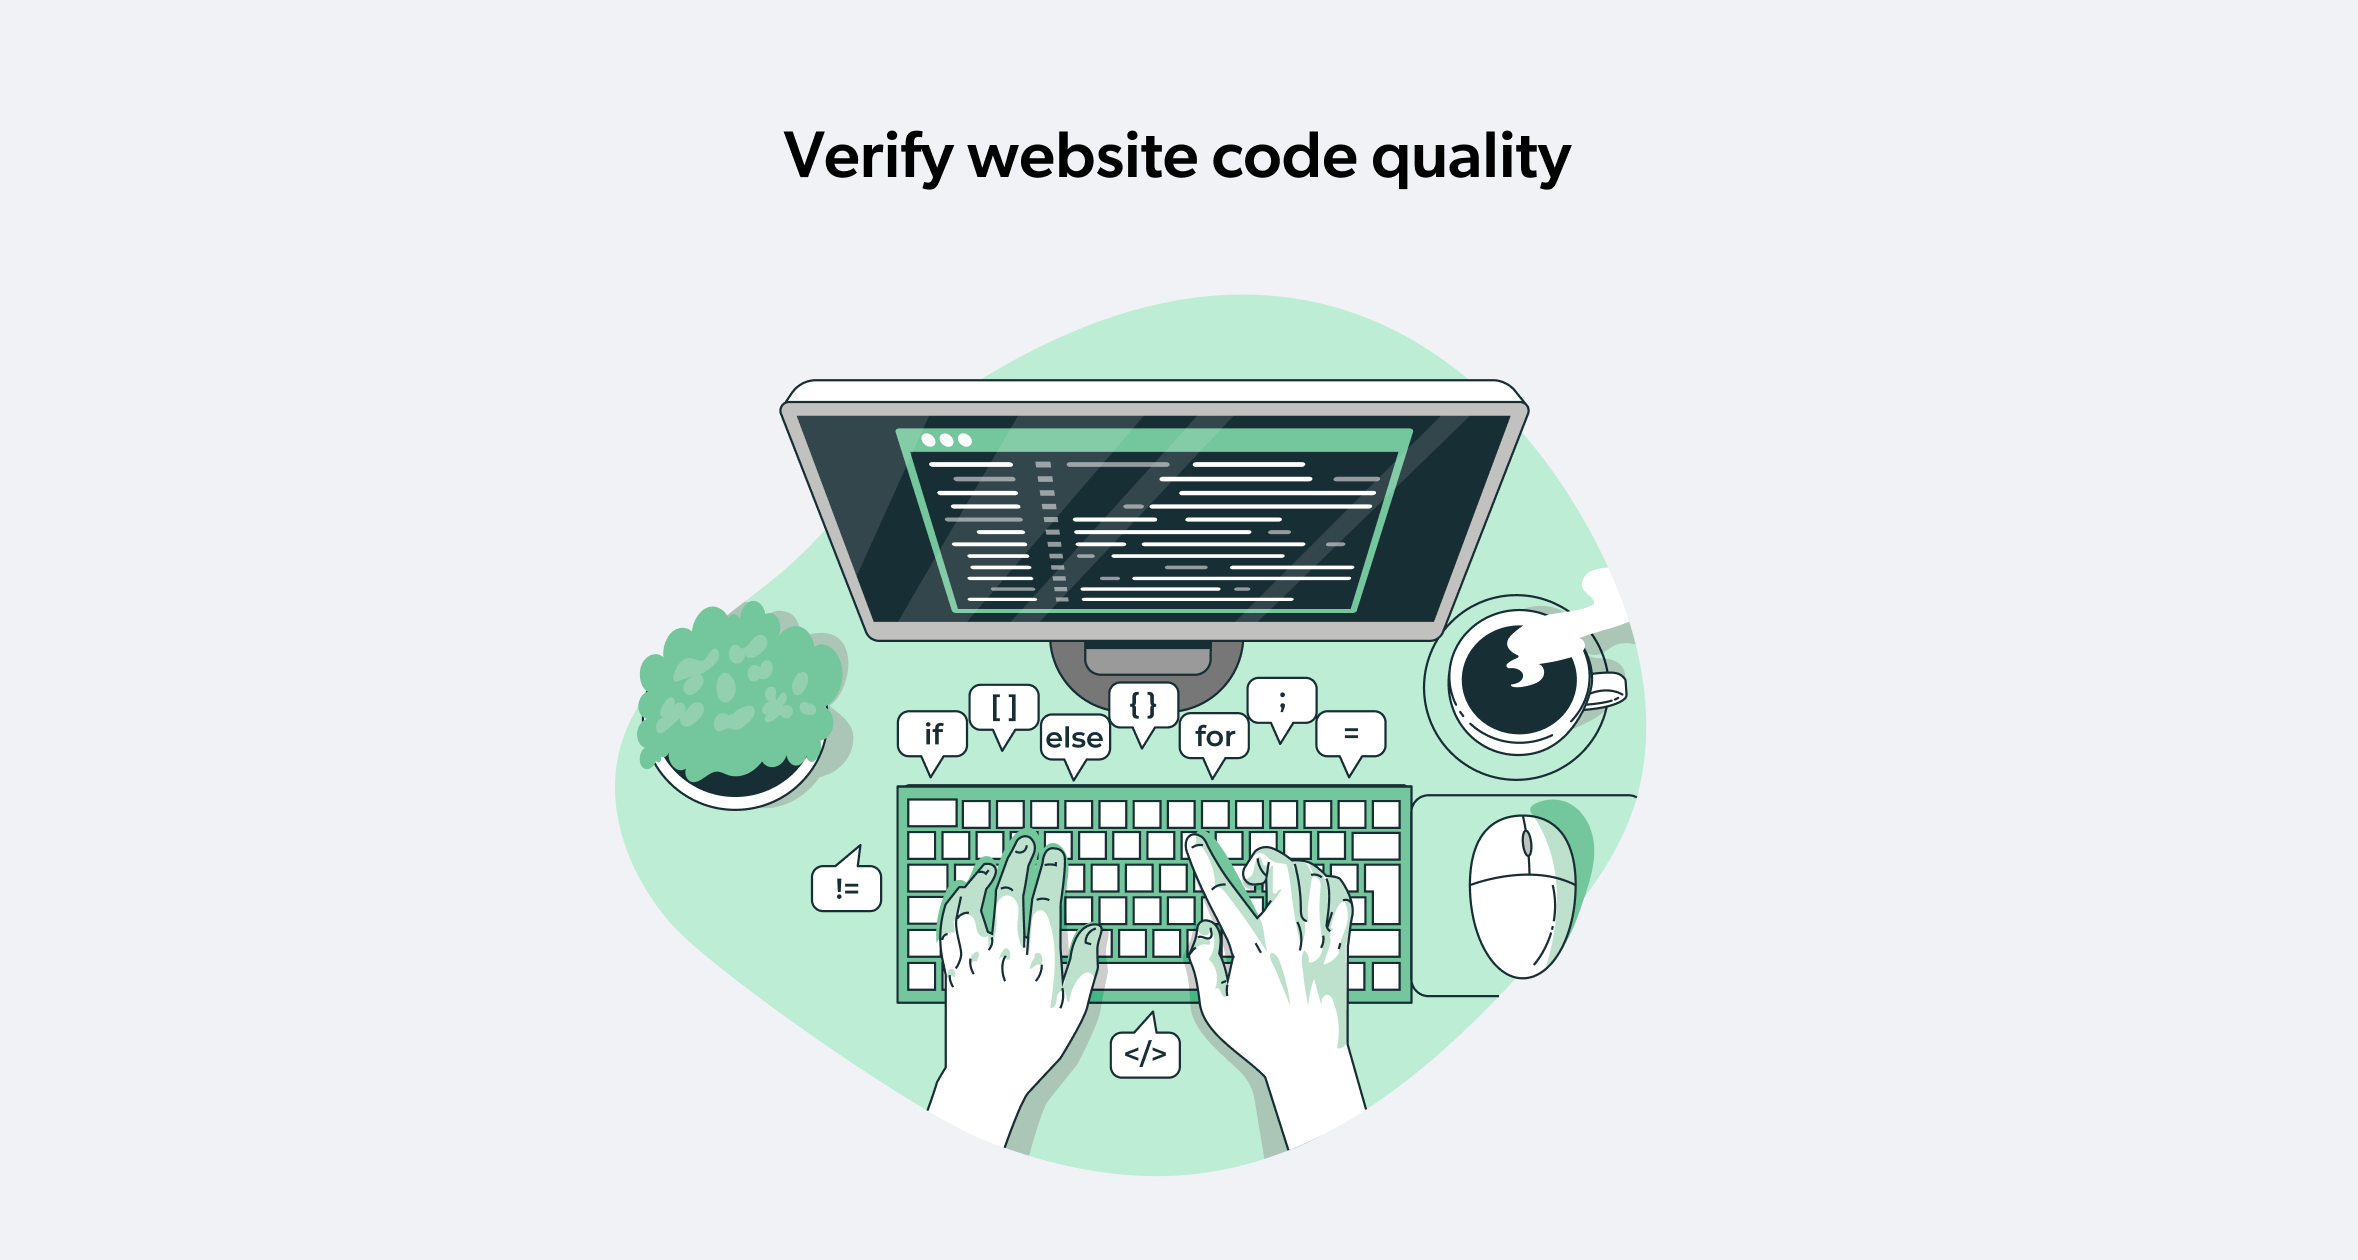 Code quality for high conversions